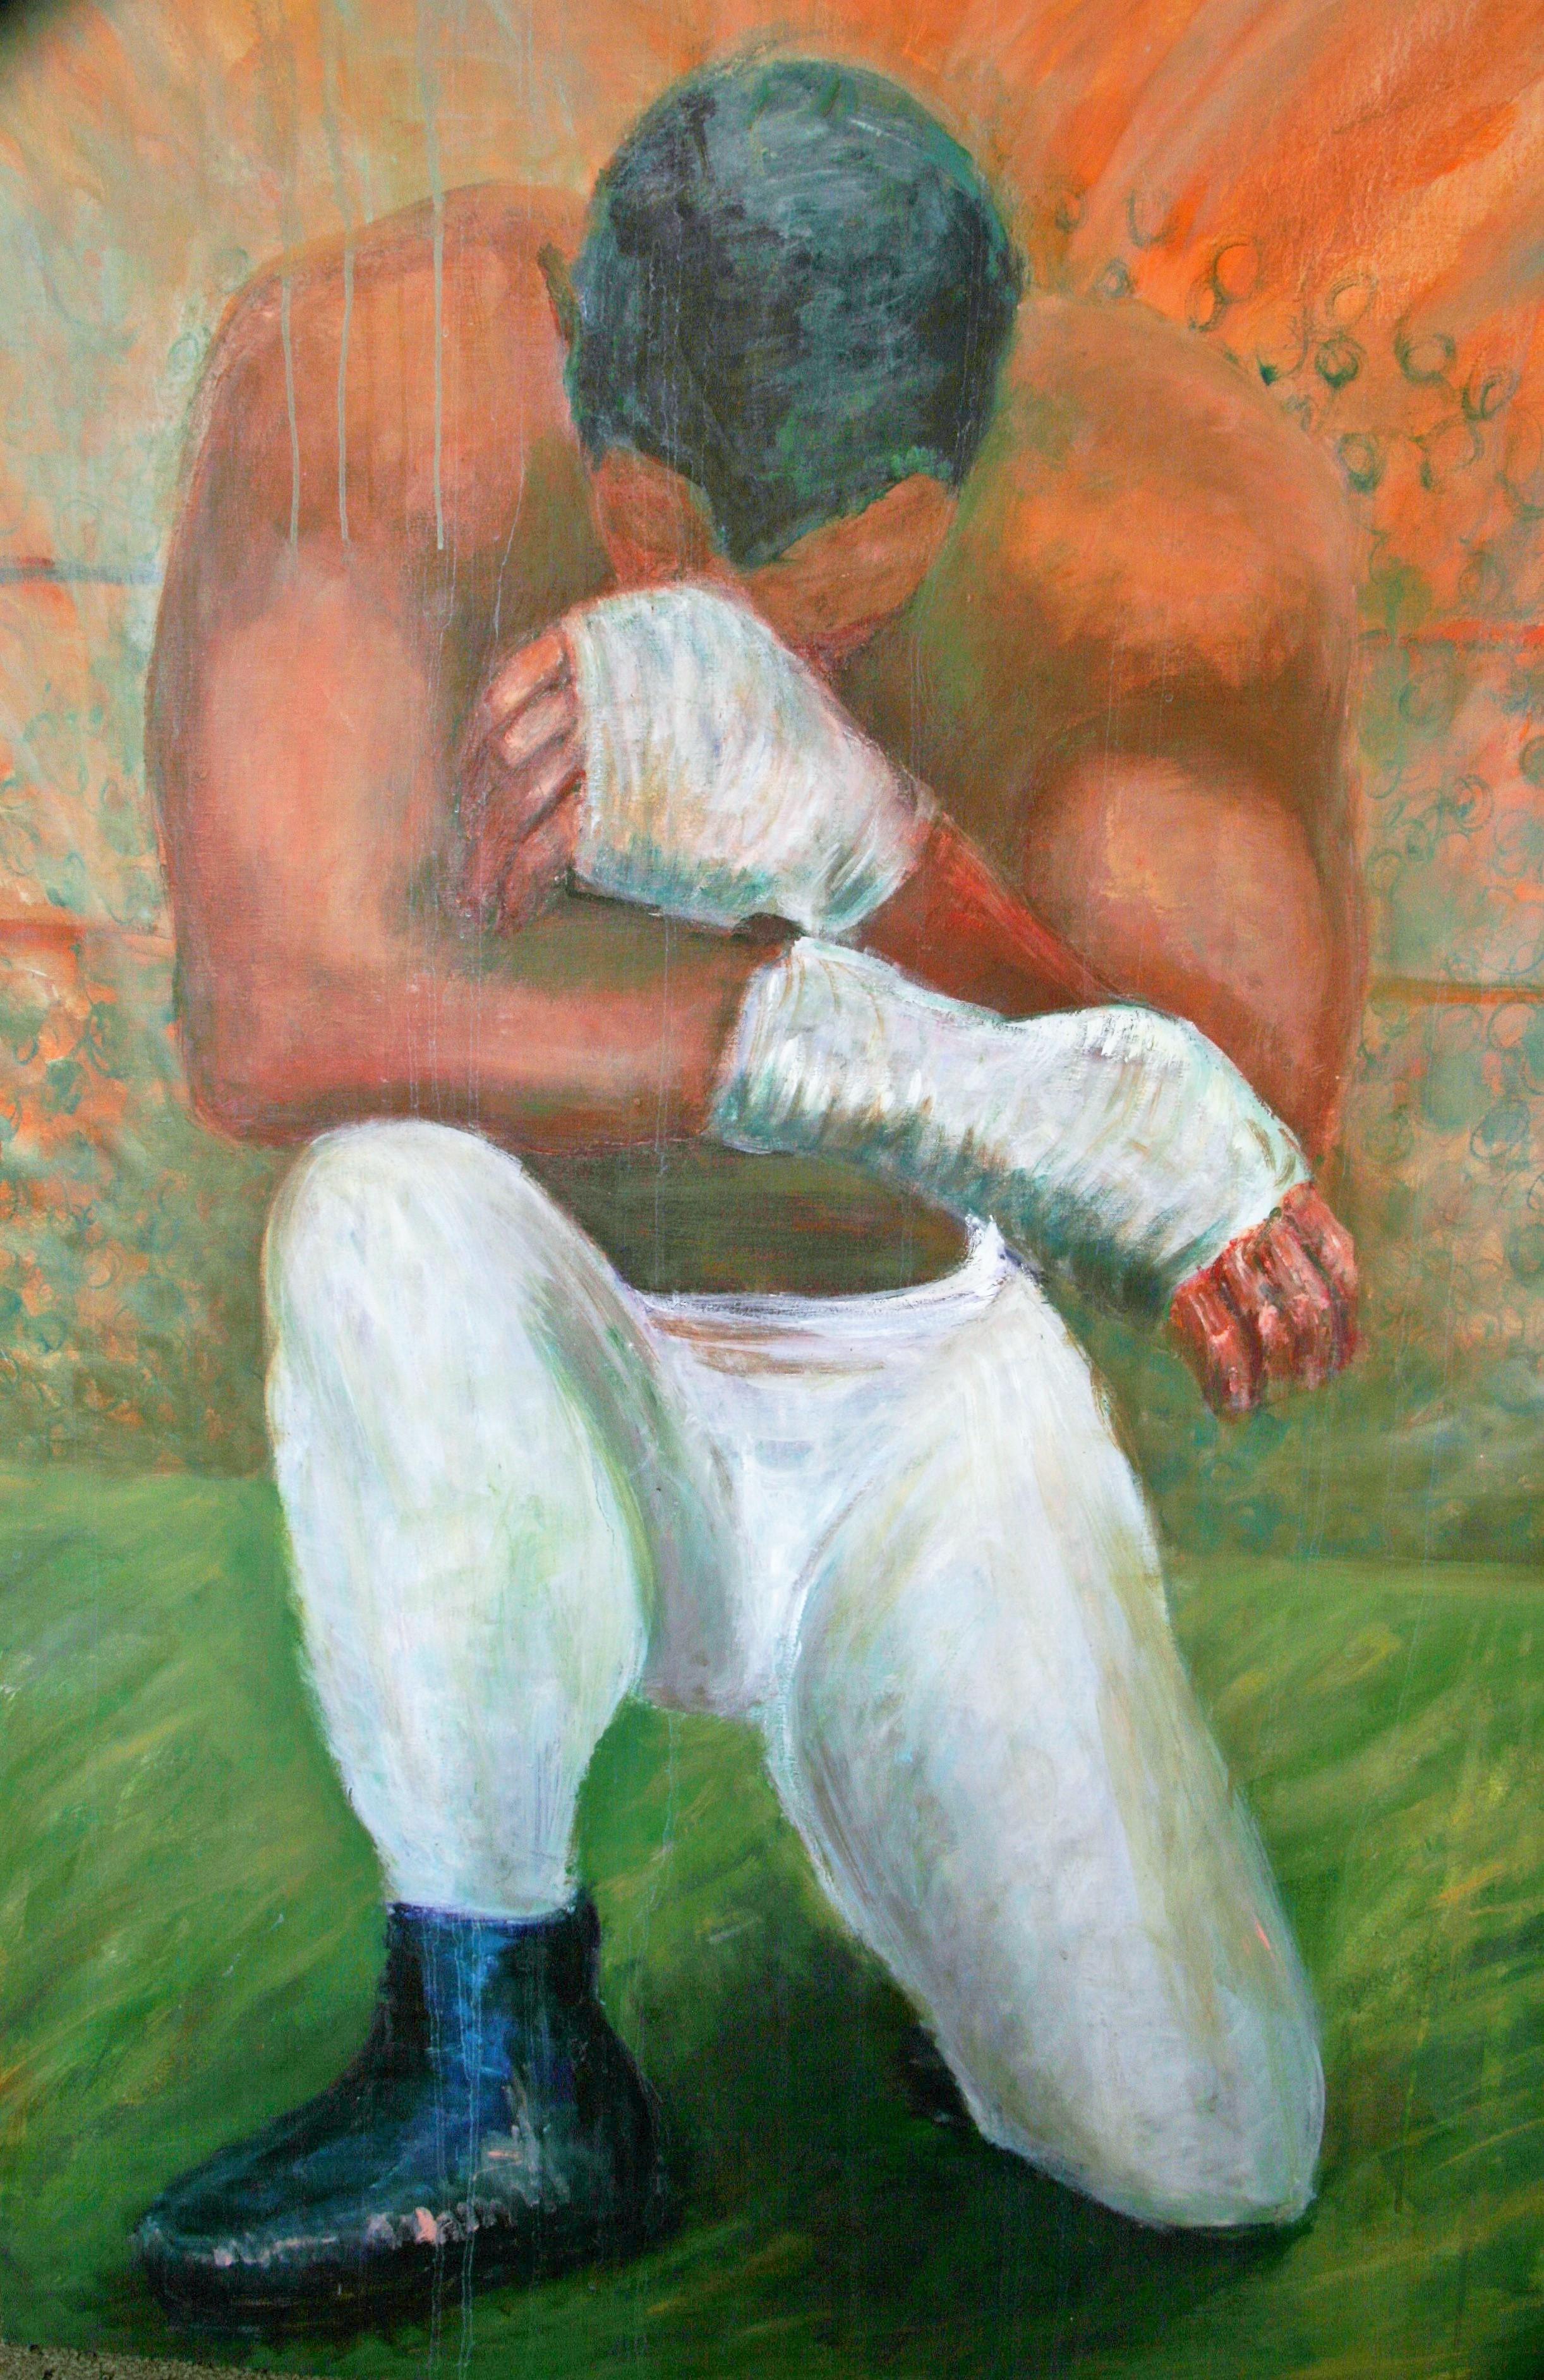    Boxer Before The Fight   - Brown Figurative Painting by Silvana Liotti